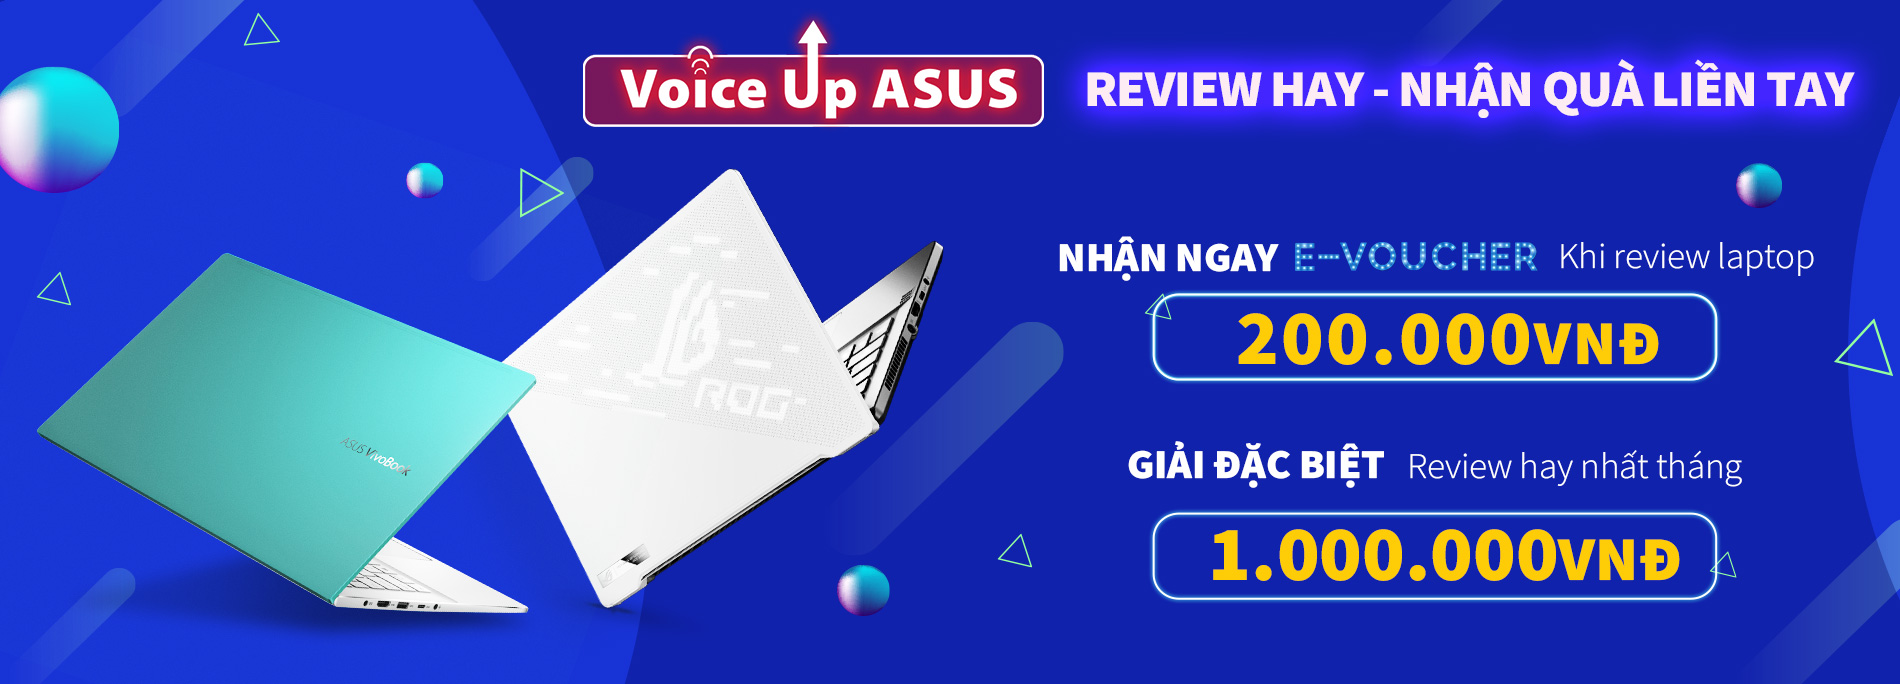 VOICE UP ASUS 2021